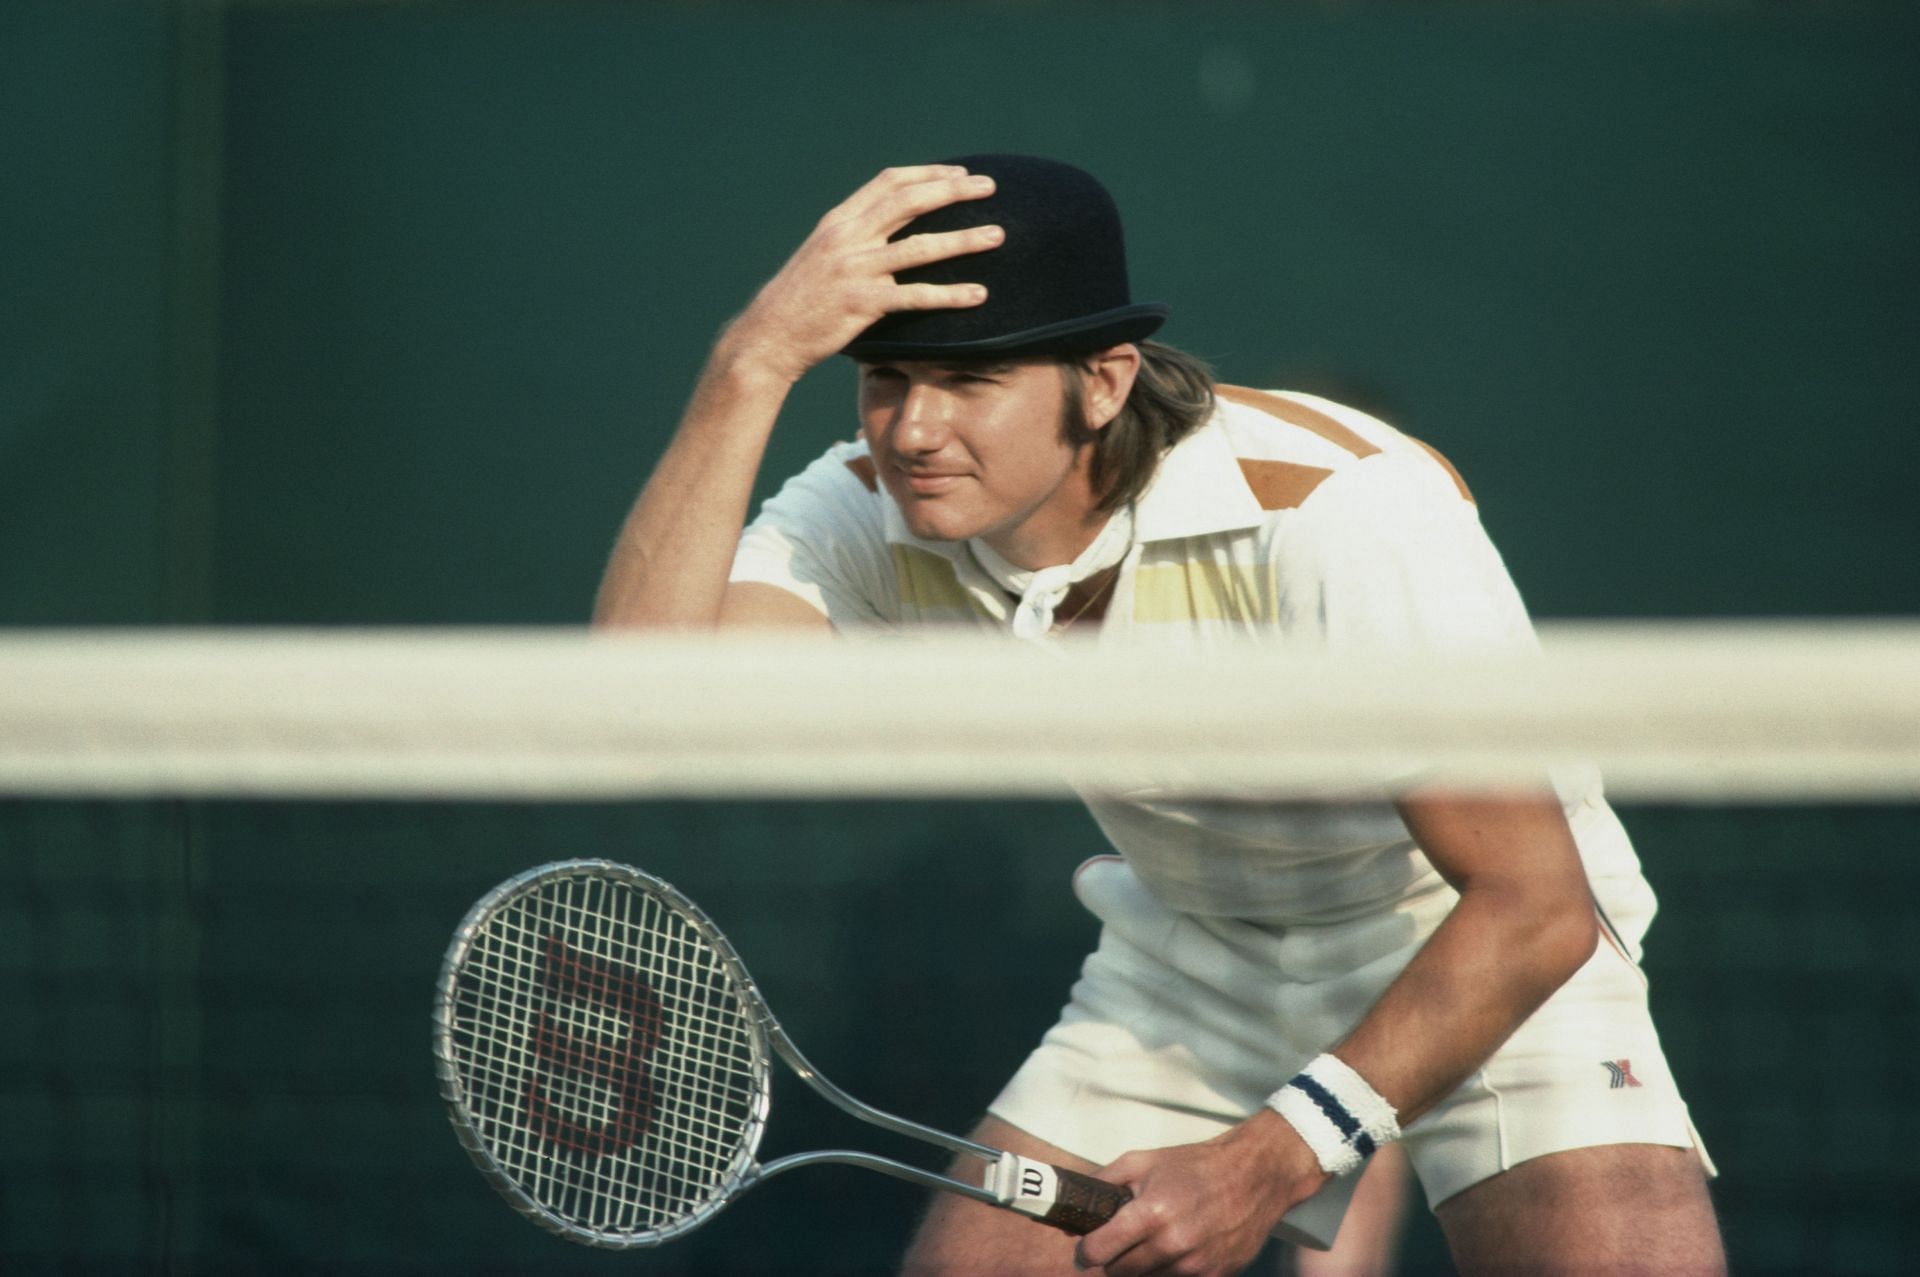 Jimmy Connors was ranked No. 1 for 160 consecutive weeks